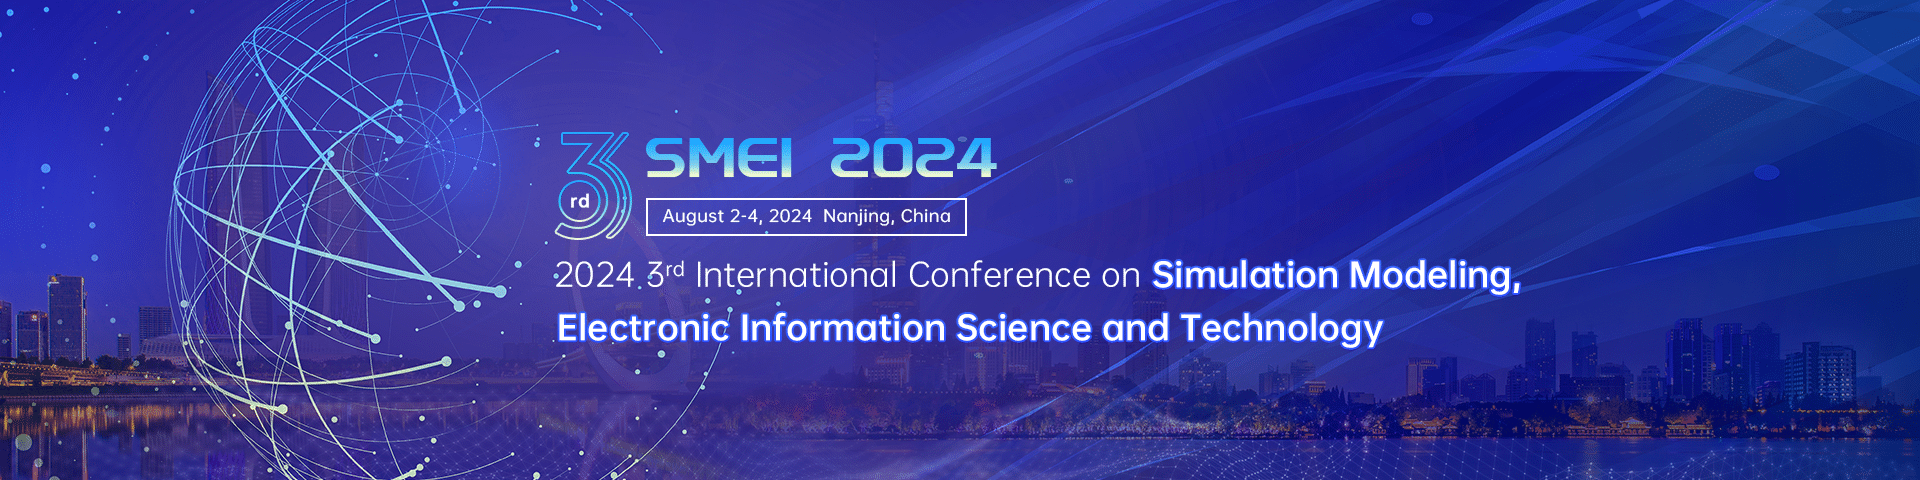 2024 3rd International Conference on Simulation Modeling, Electronic Information Science and Technology (SMEI 2024)